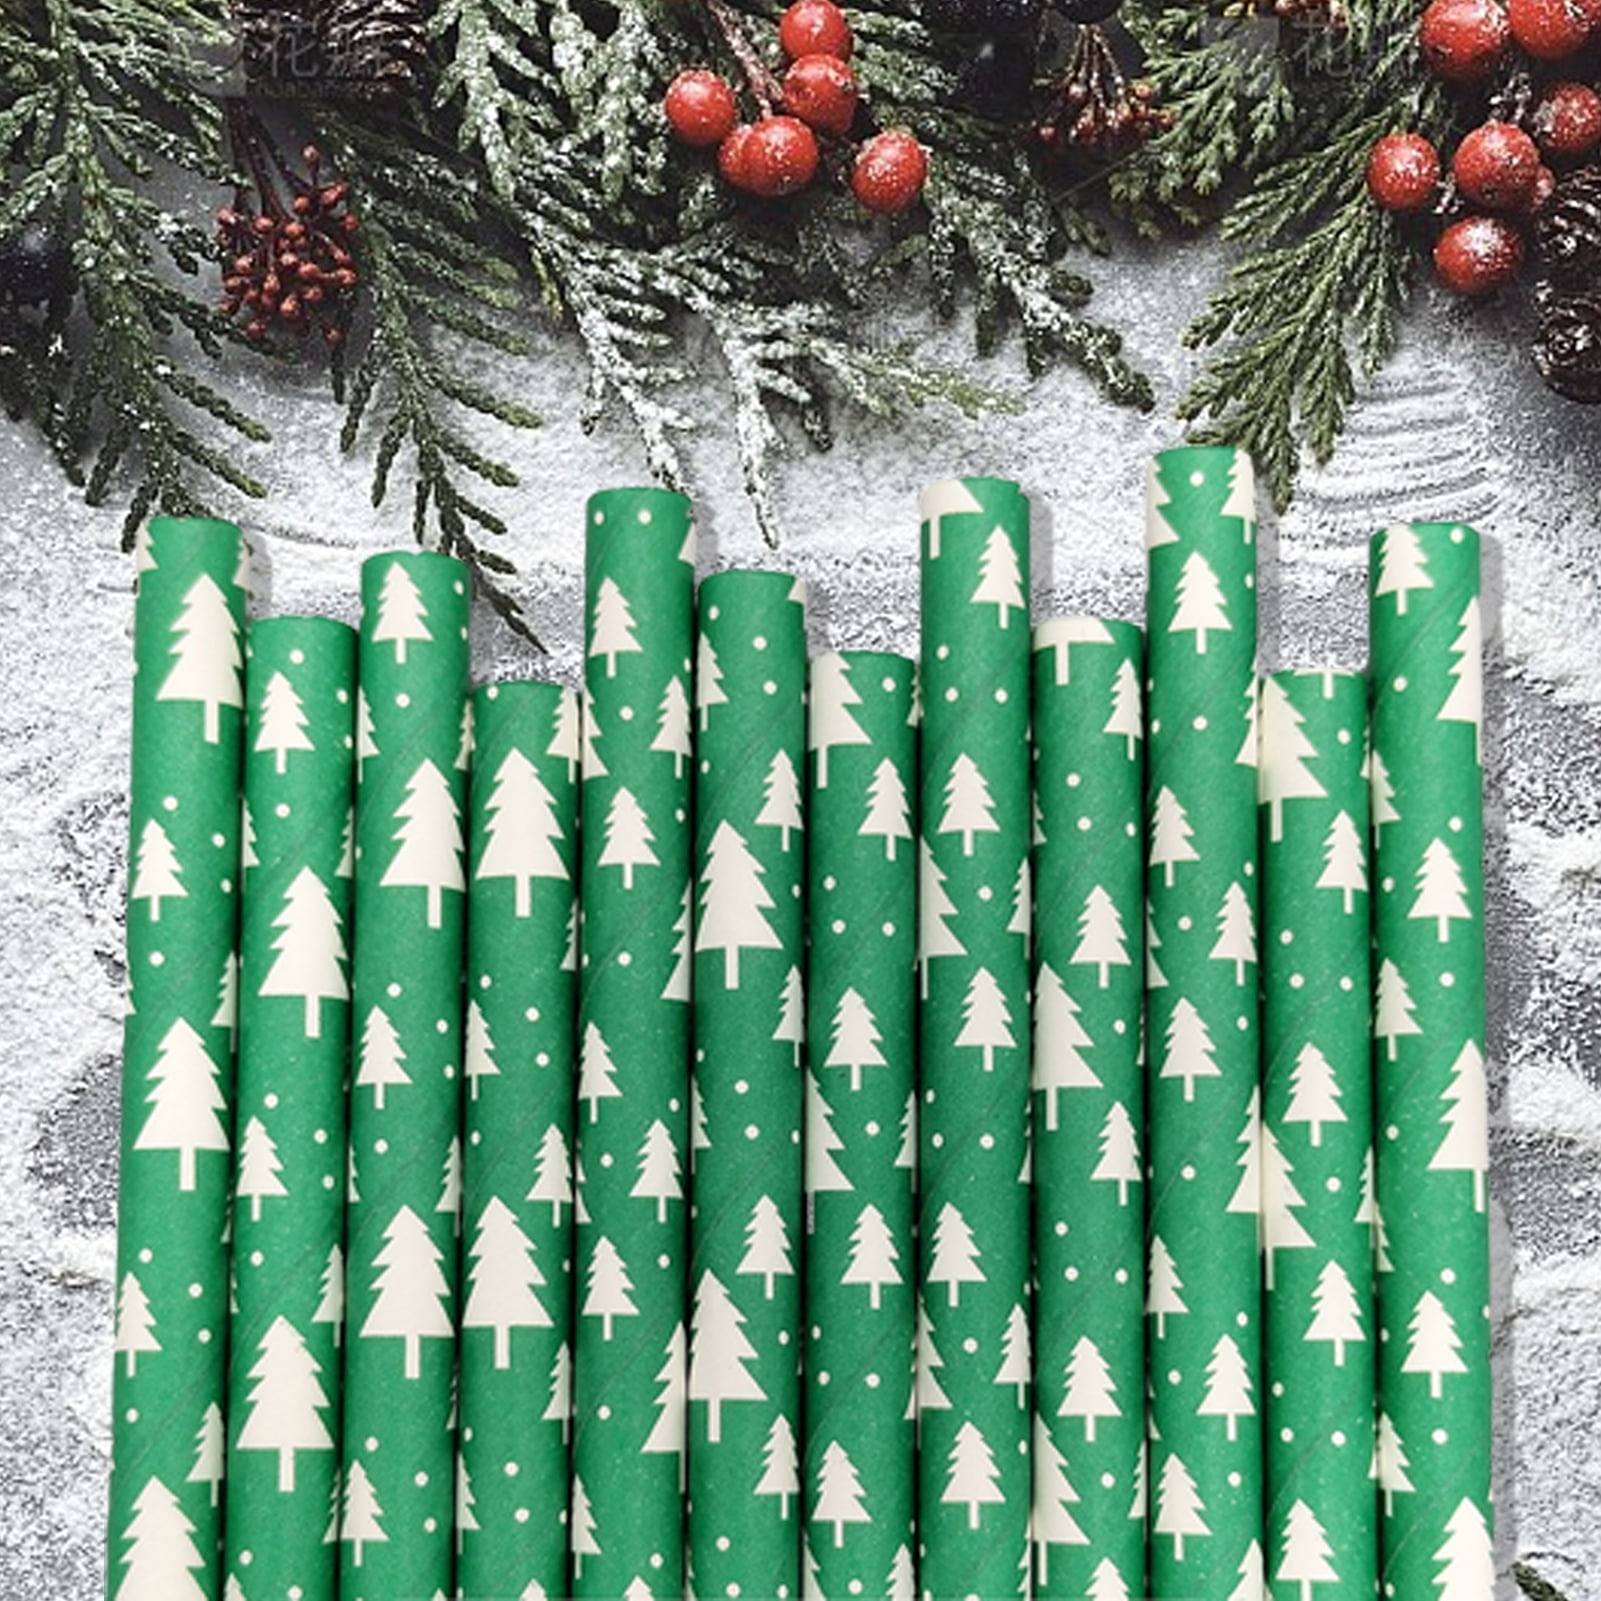 100 Pcs Festive Christmas Paper Drinking Straws with Holiday Prints - Ideal  for Christmas and New Year's Parties